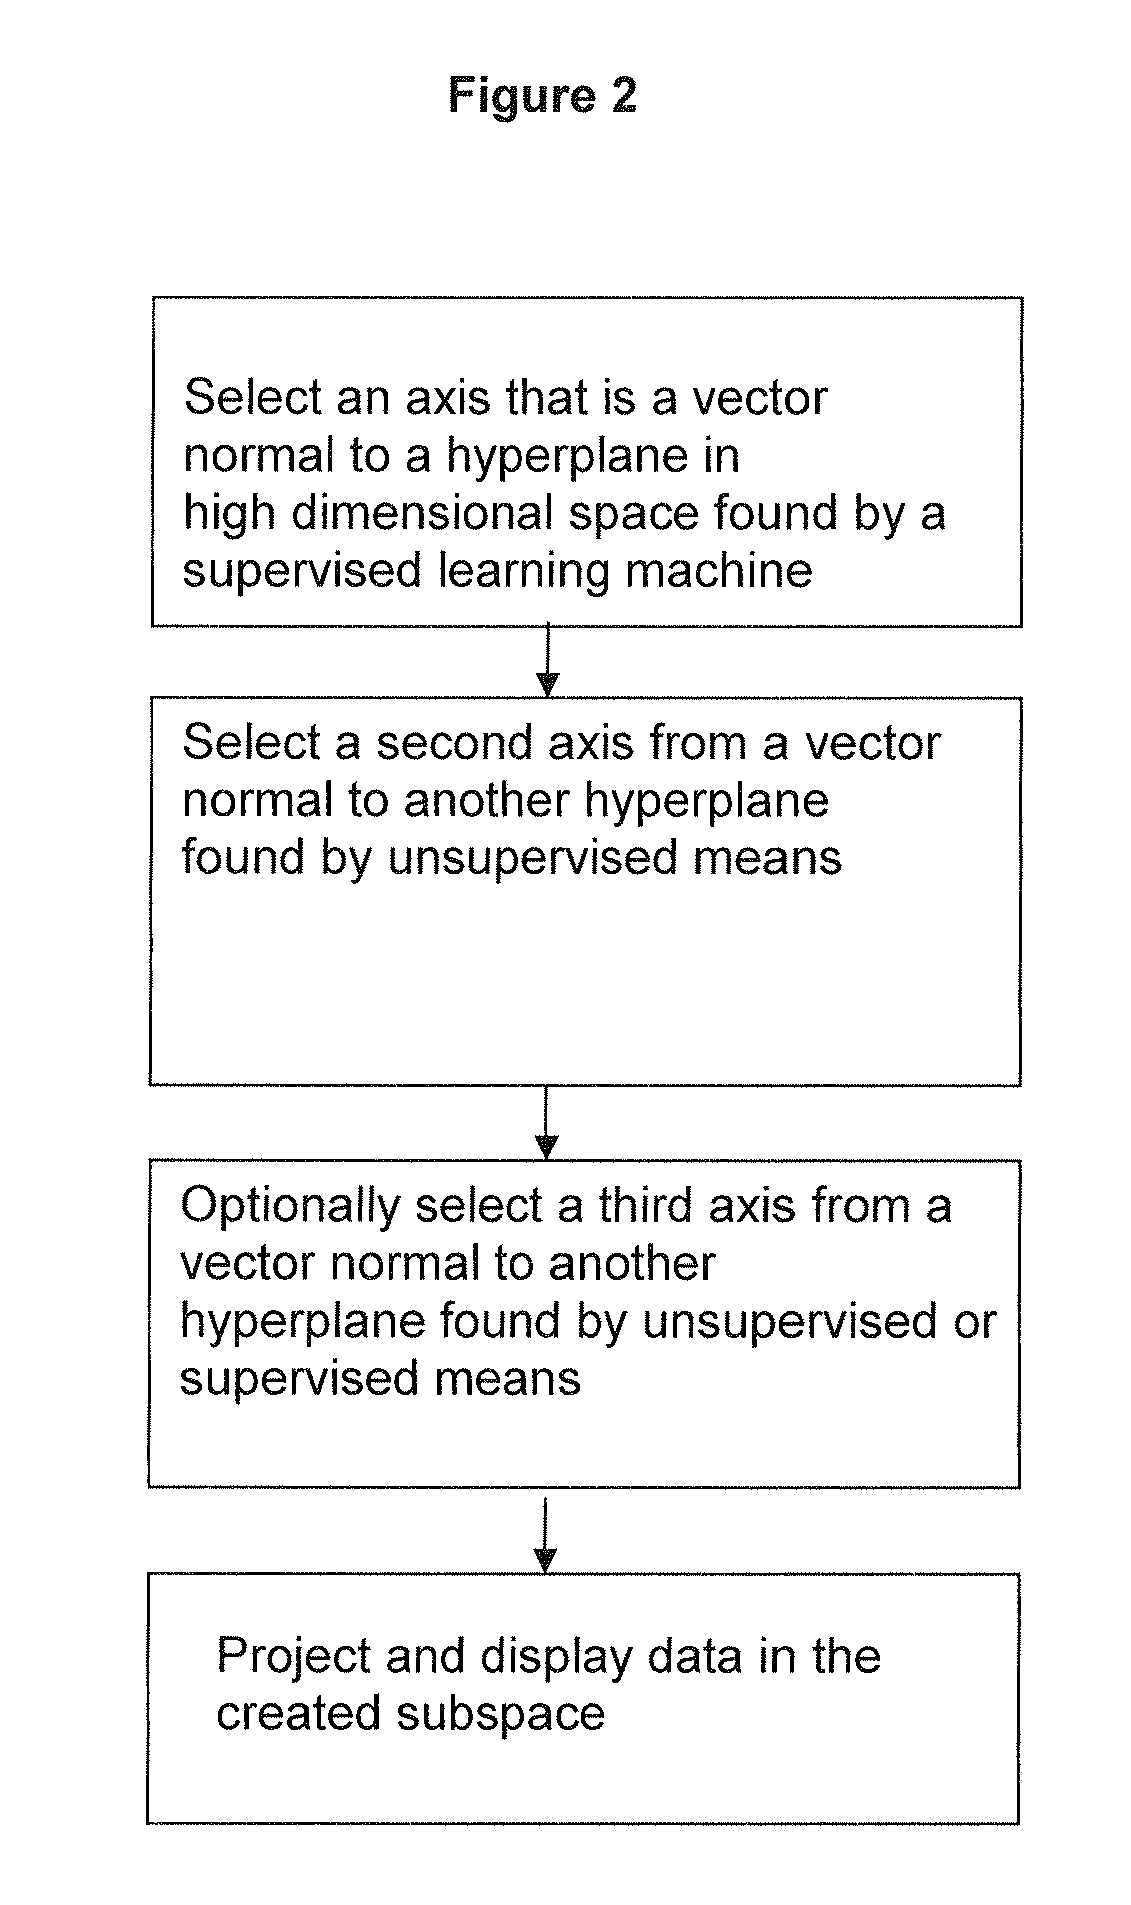 Methods for mapping data into lower dimensions